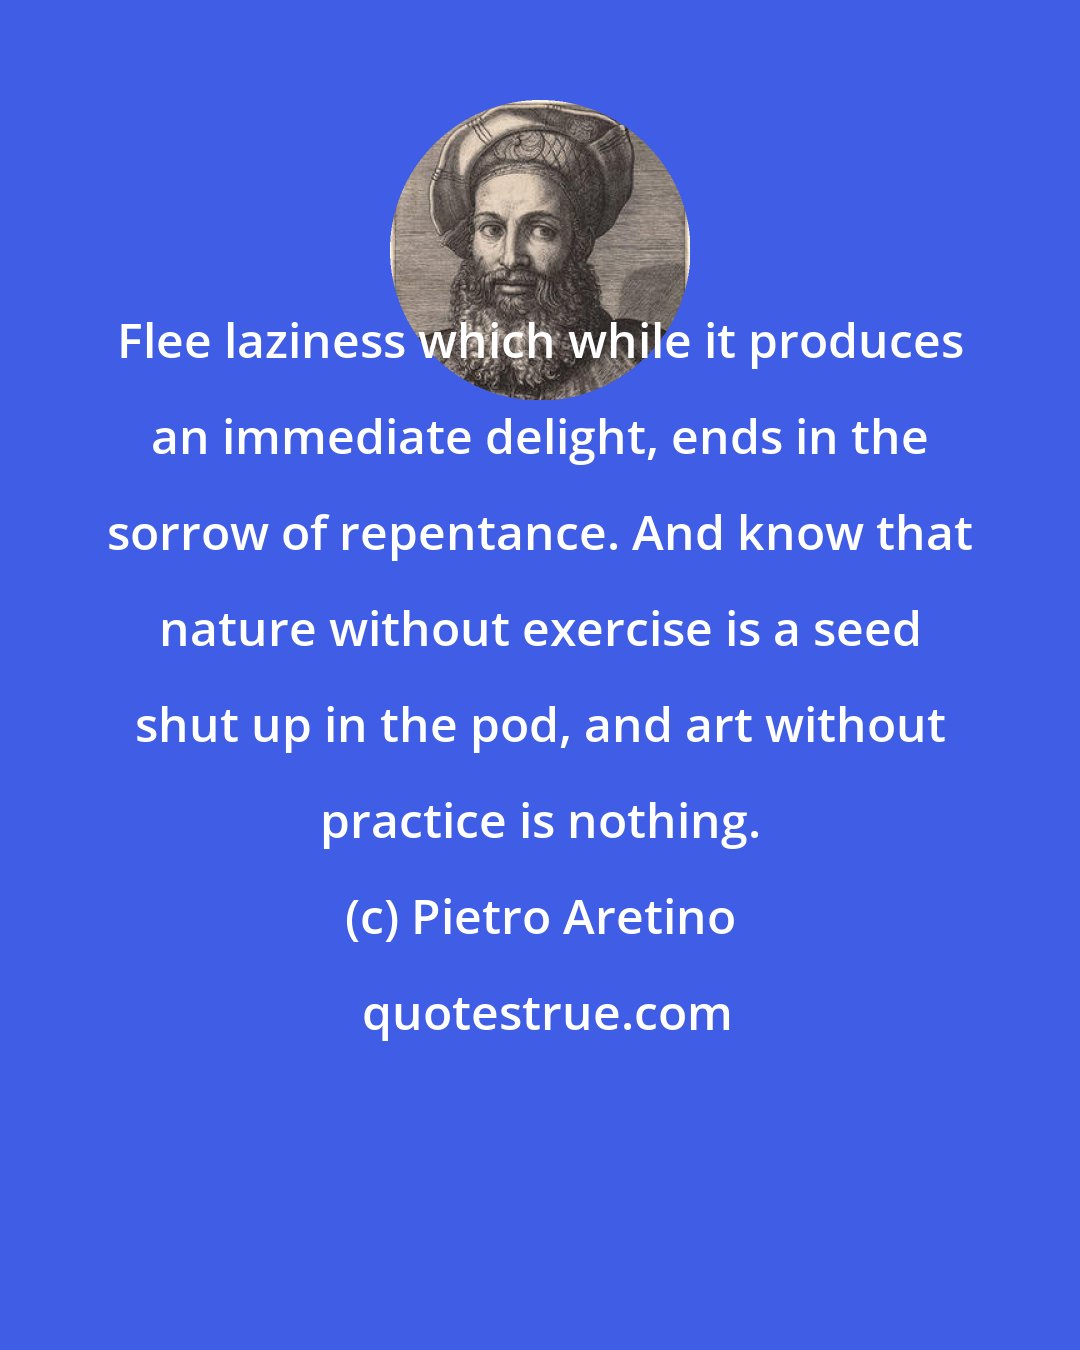 Pietro Aretino: Flee laziness which while it produces an immediate delight, ends in the sorrow of repentance. And know that nature without exercise is a seed shut up in the pod, and art without practice is nothing.